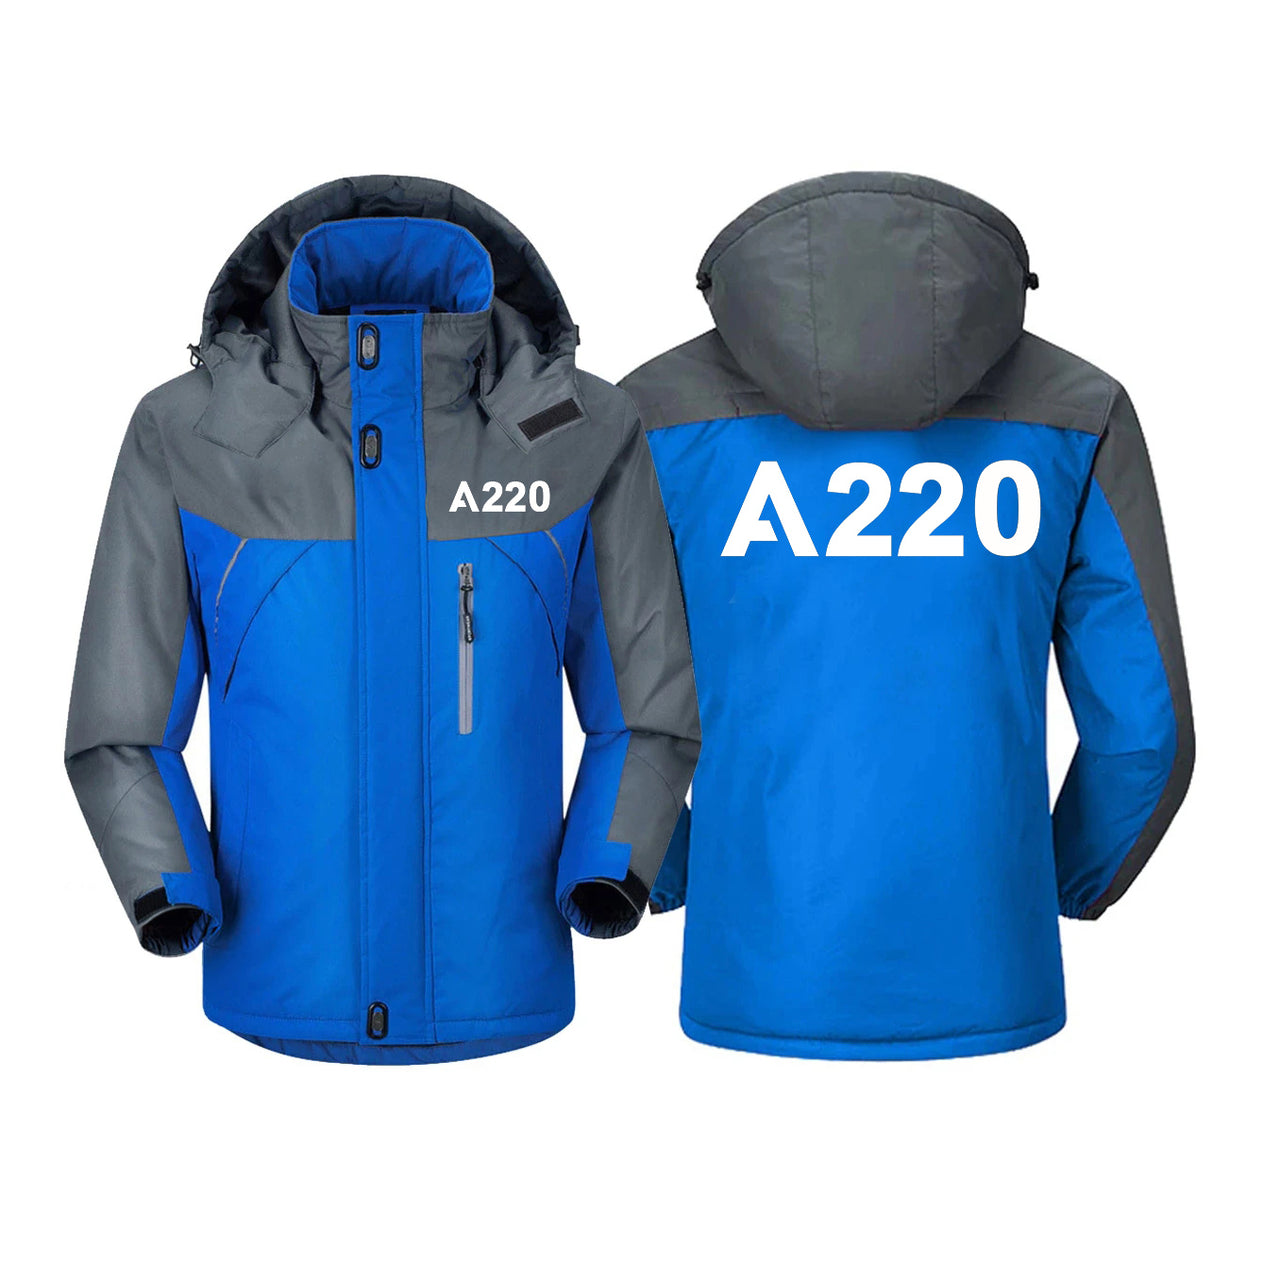 A220 Flat Text Designed Thick Winter Jackets